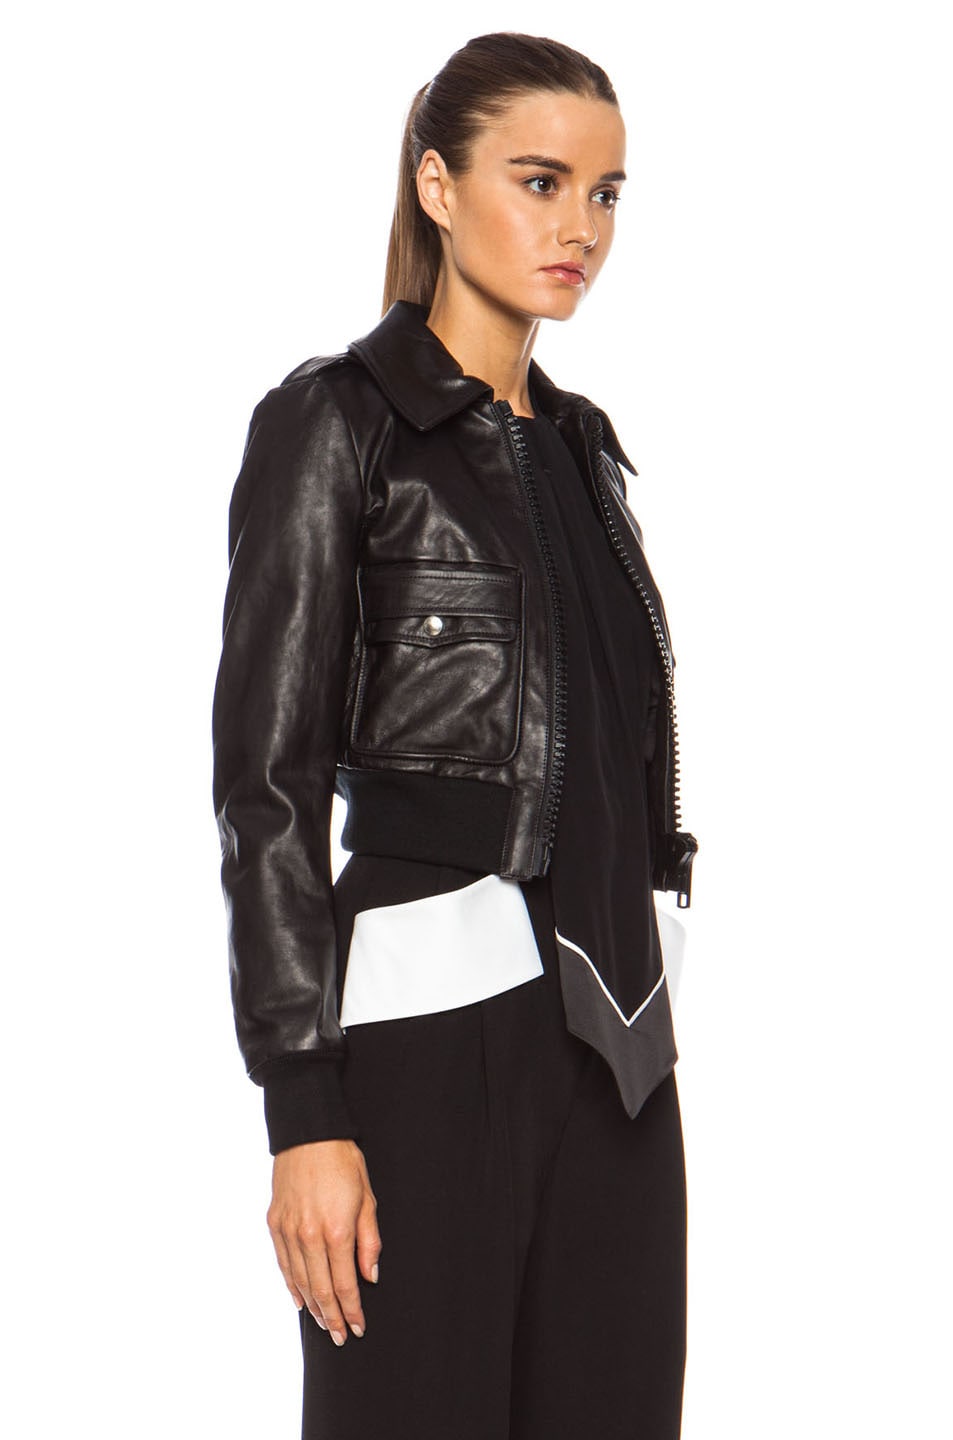 Givenchy Leather Bomber Jacket in Black | FWRD